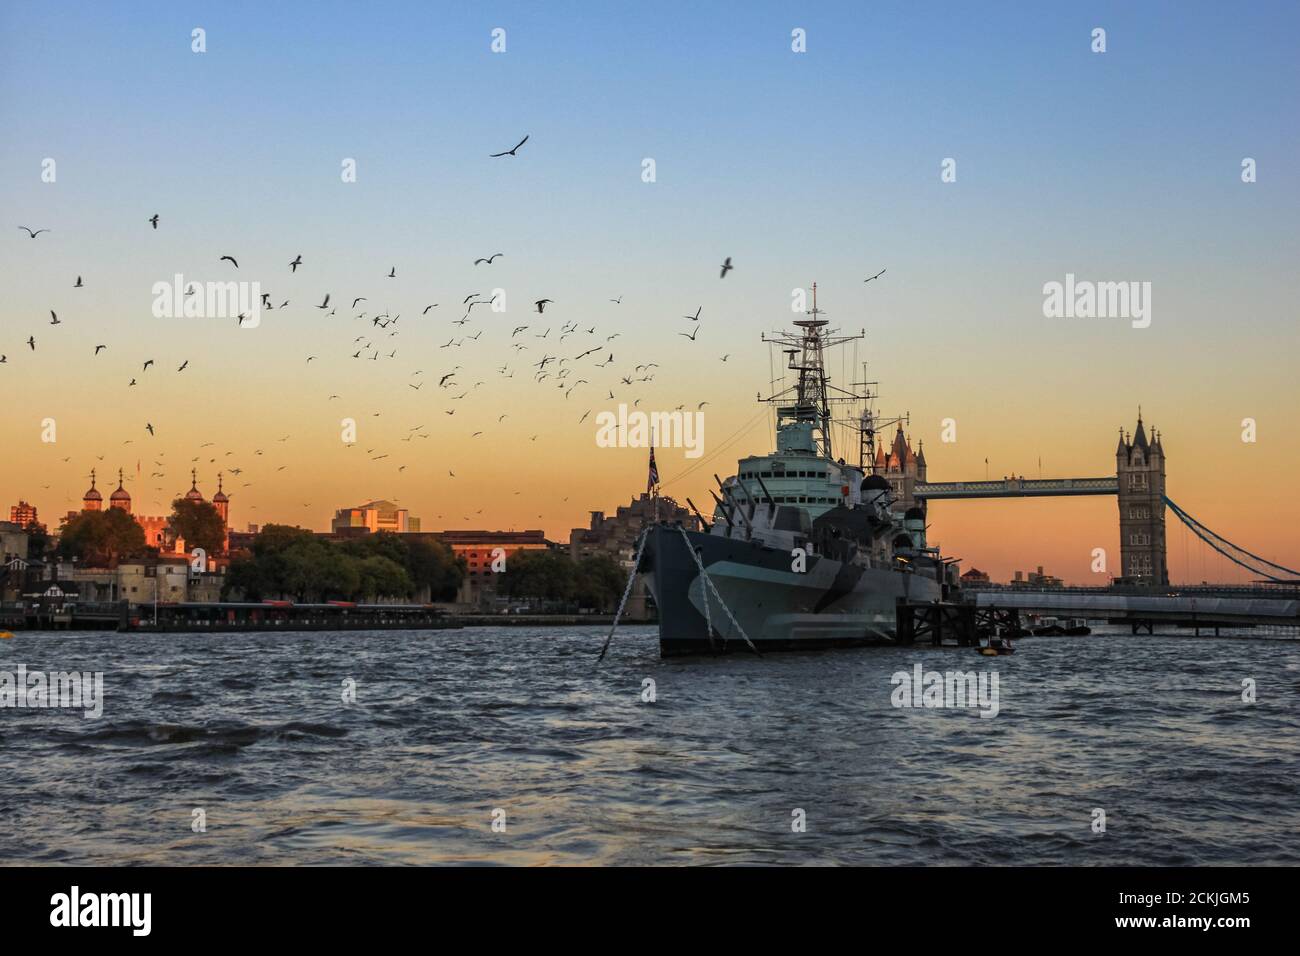 Sunset over London - Beautiful view of the HMS Belfast at sunset, in front of Tower Bridge and the Tower of London Stock Photo